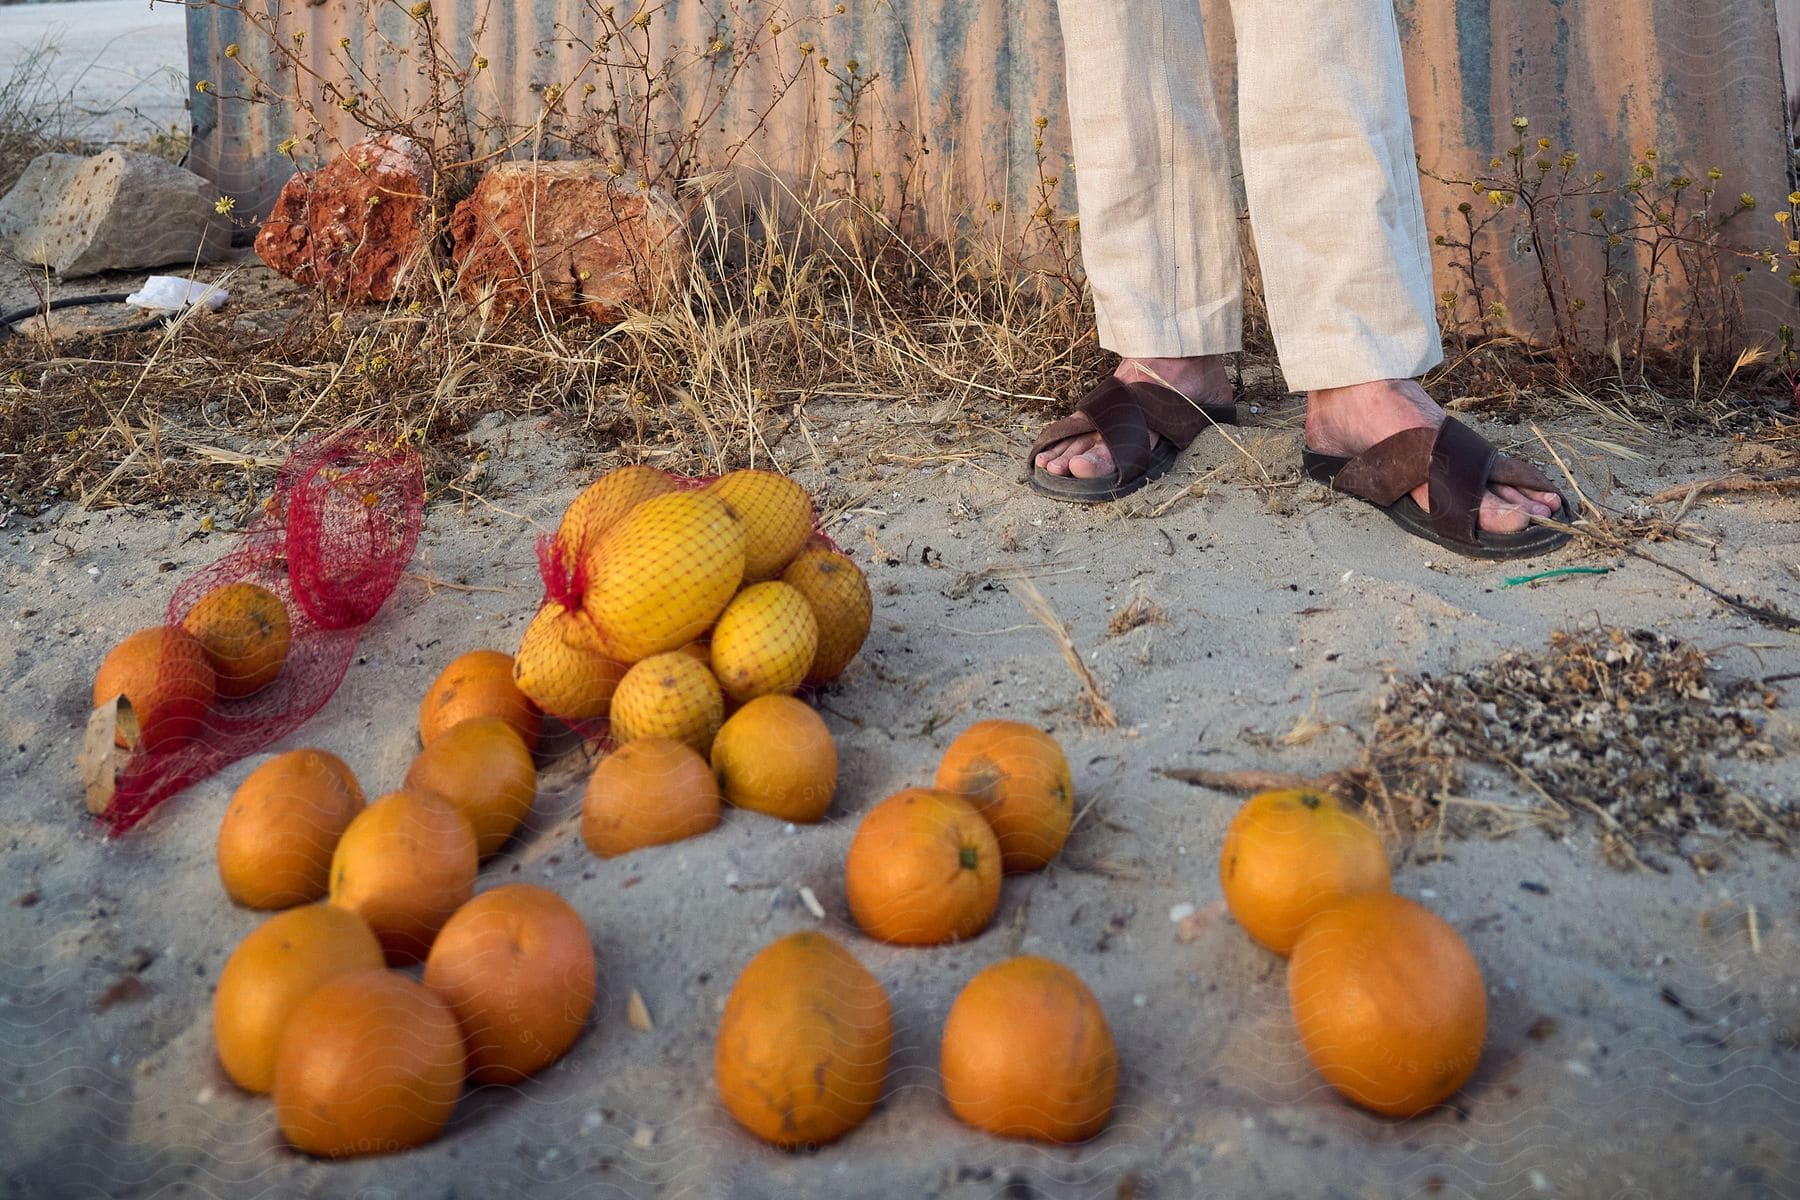 Bag with some oranges thrown on the sand floor and in the background a person's feet.